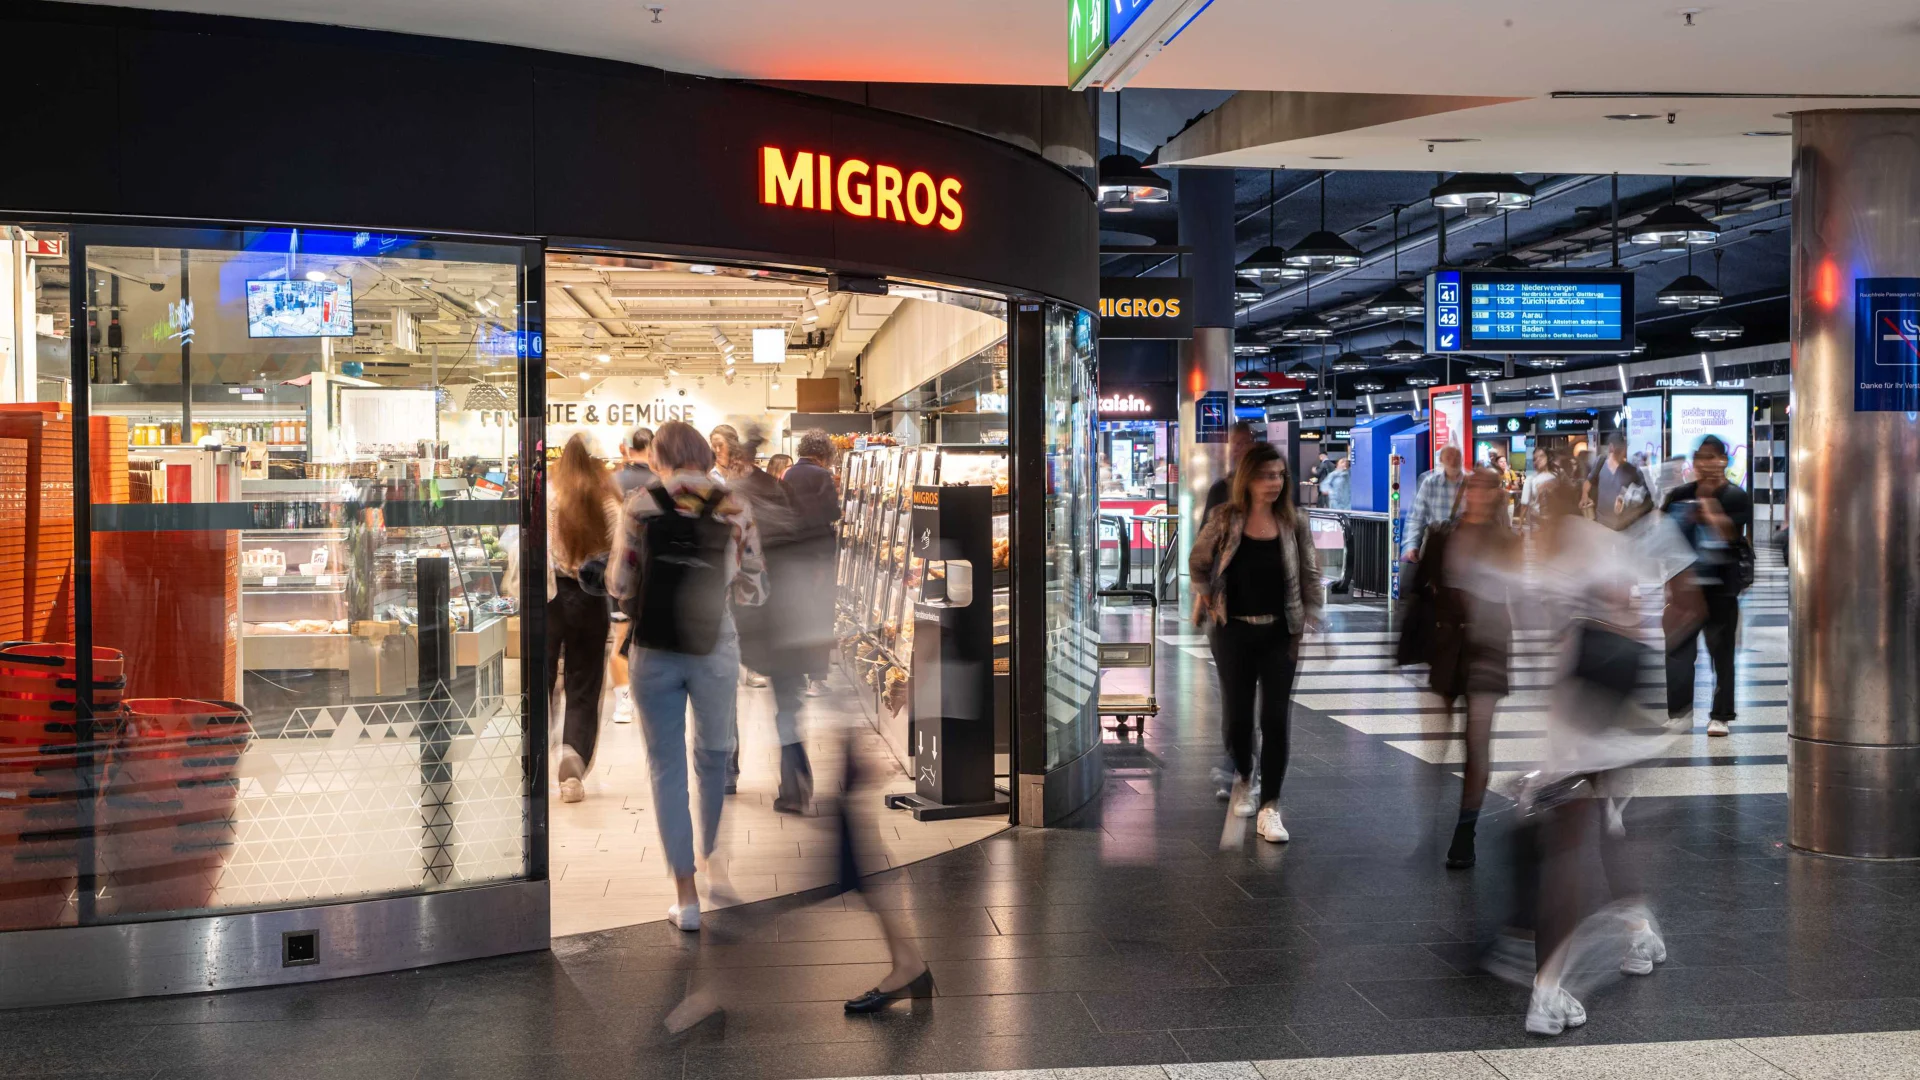 Entrance to the Migros branch at Zurich main station